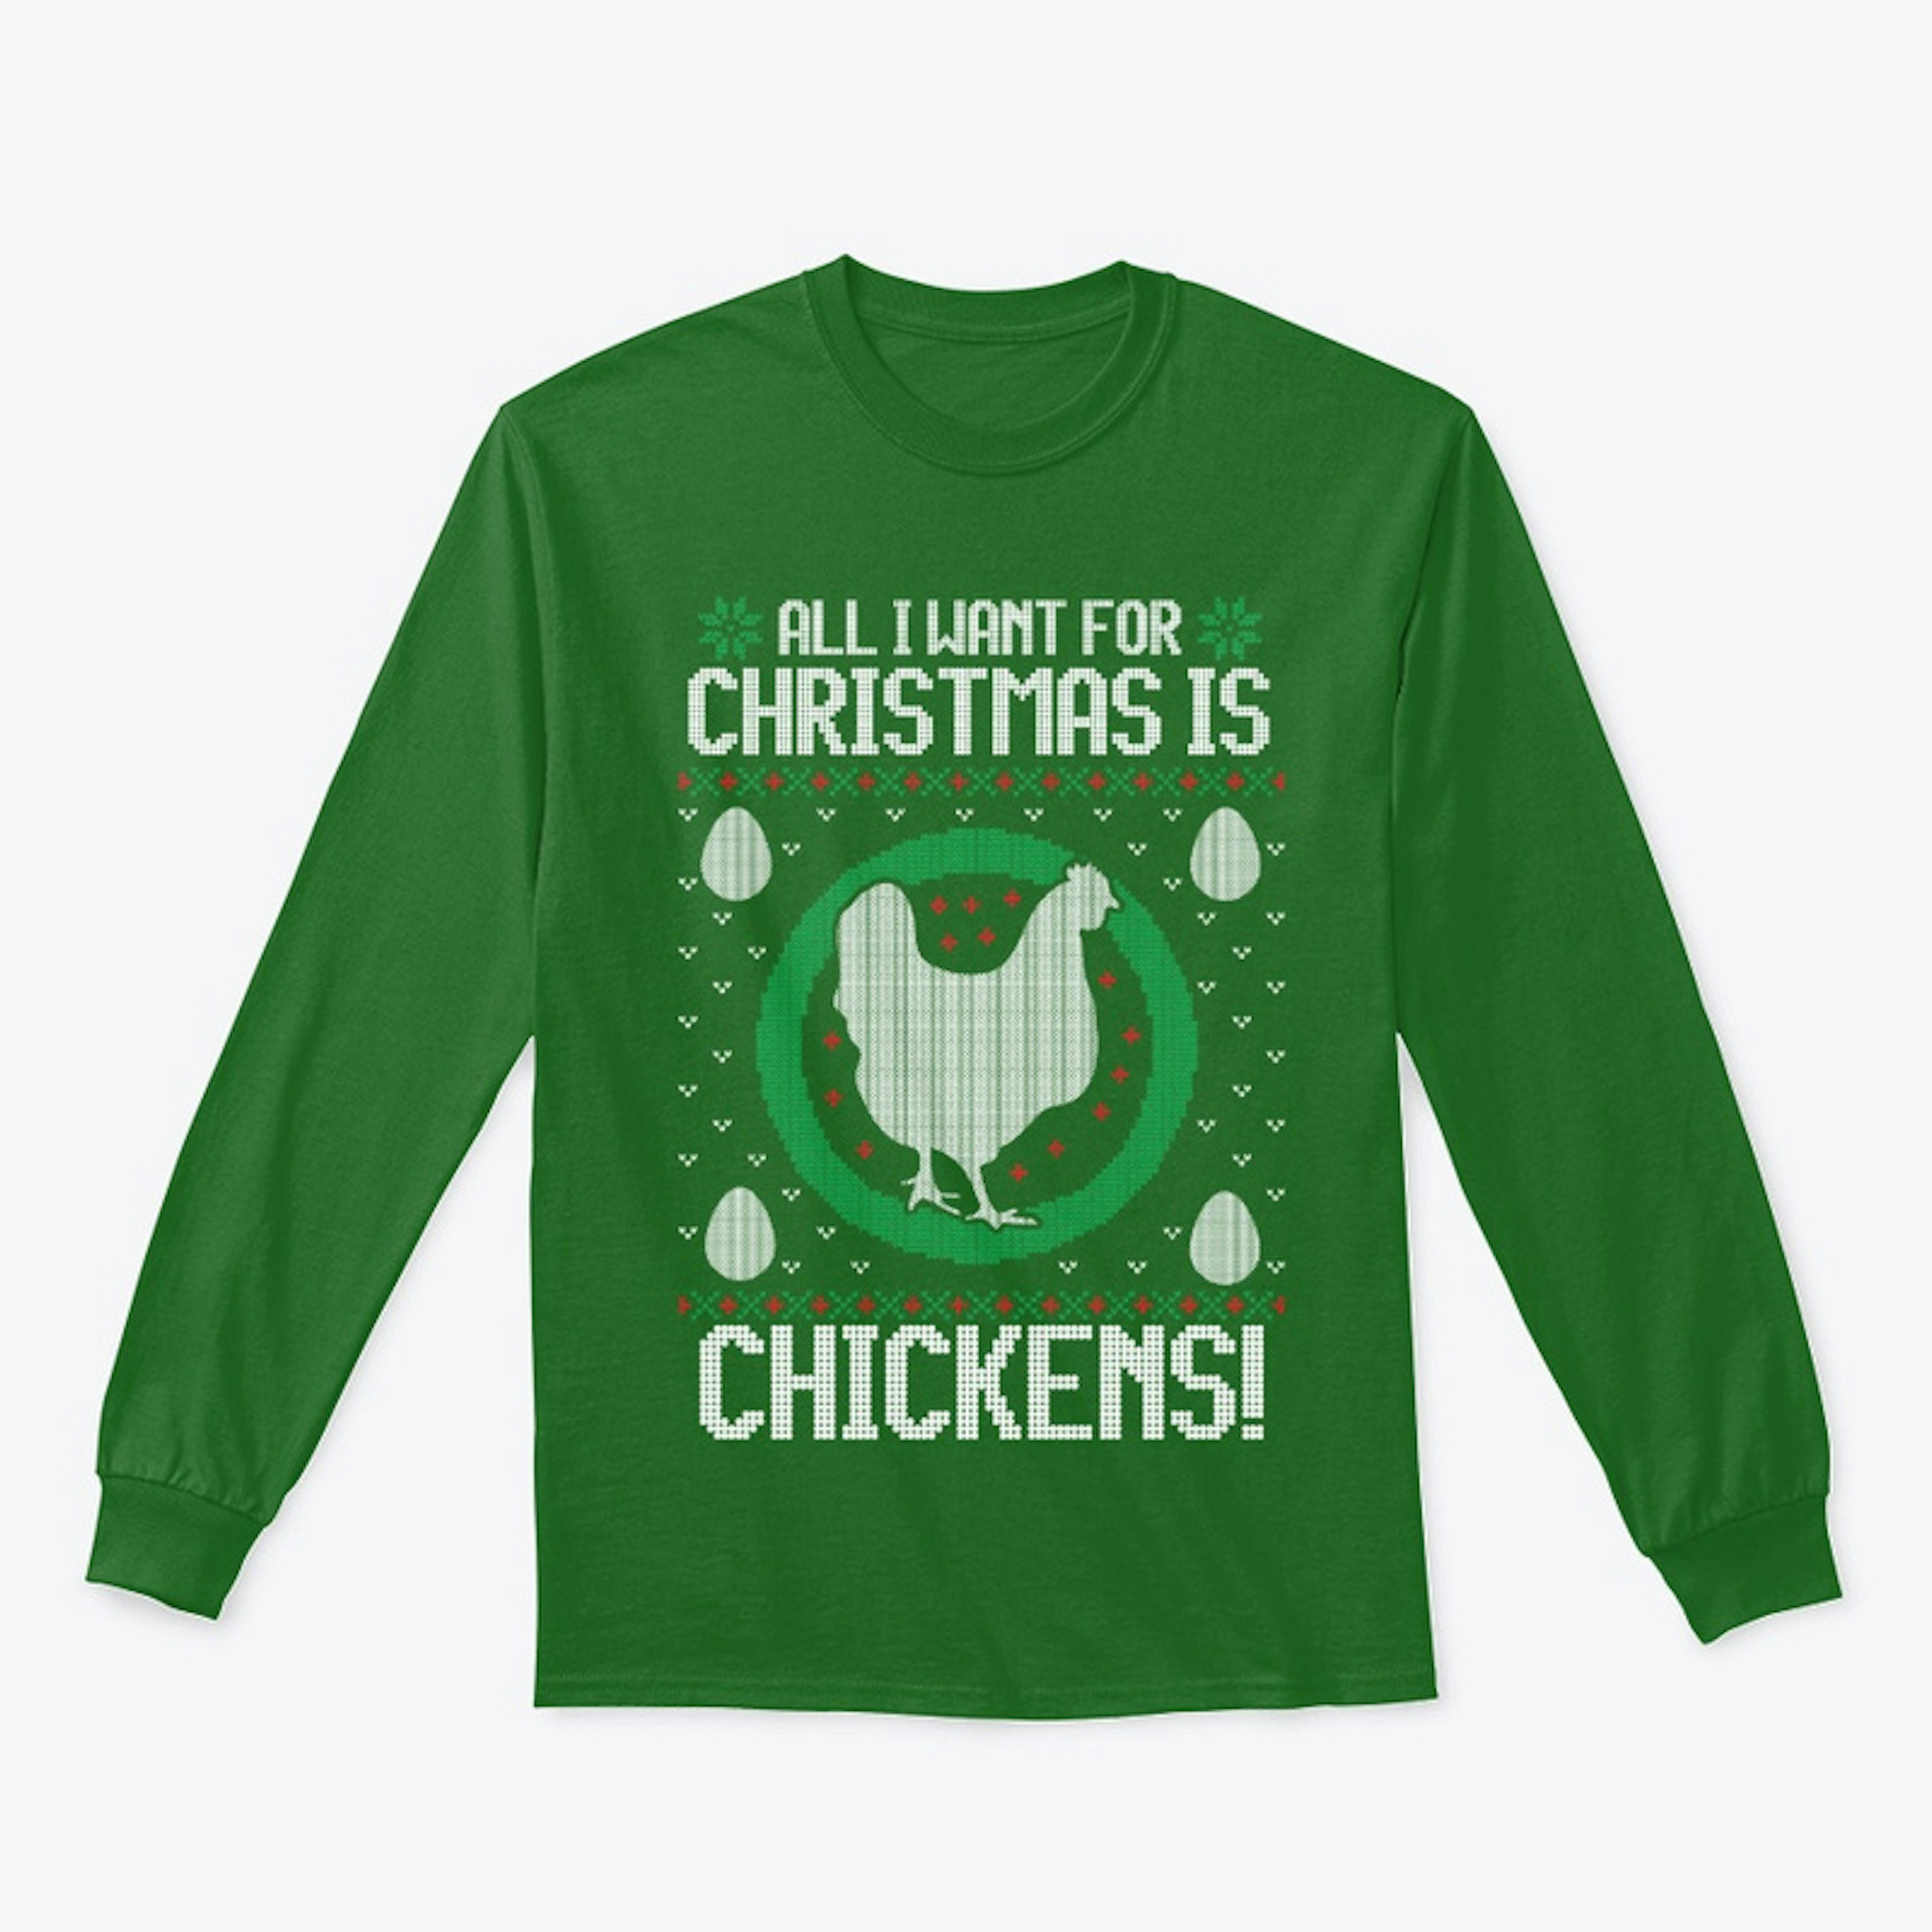 All I Want for Christmas is CHICKENS!